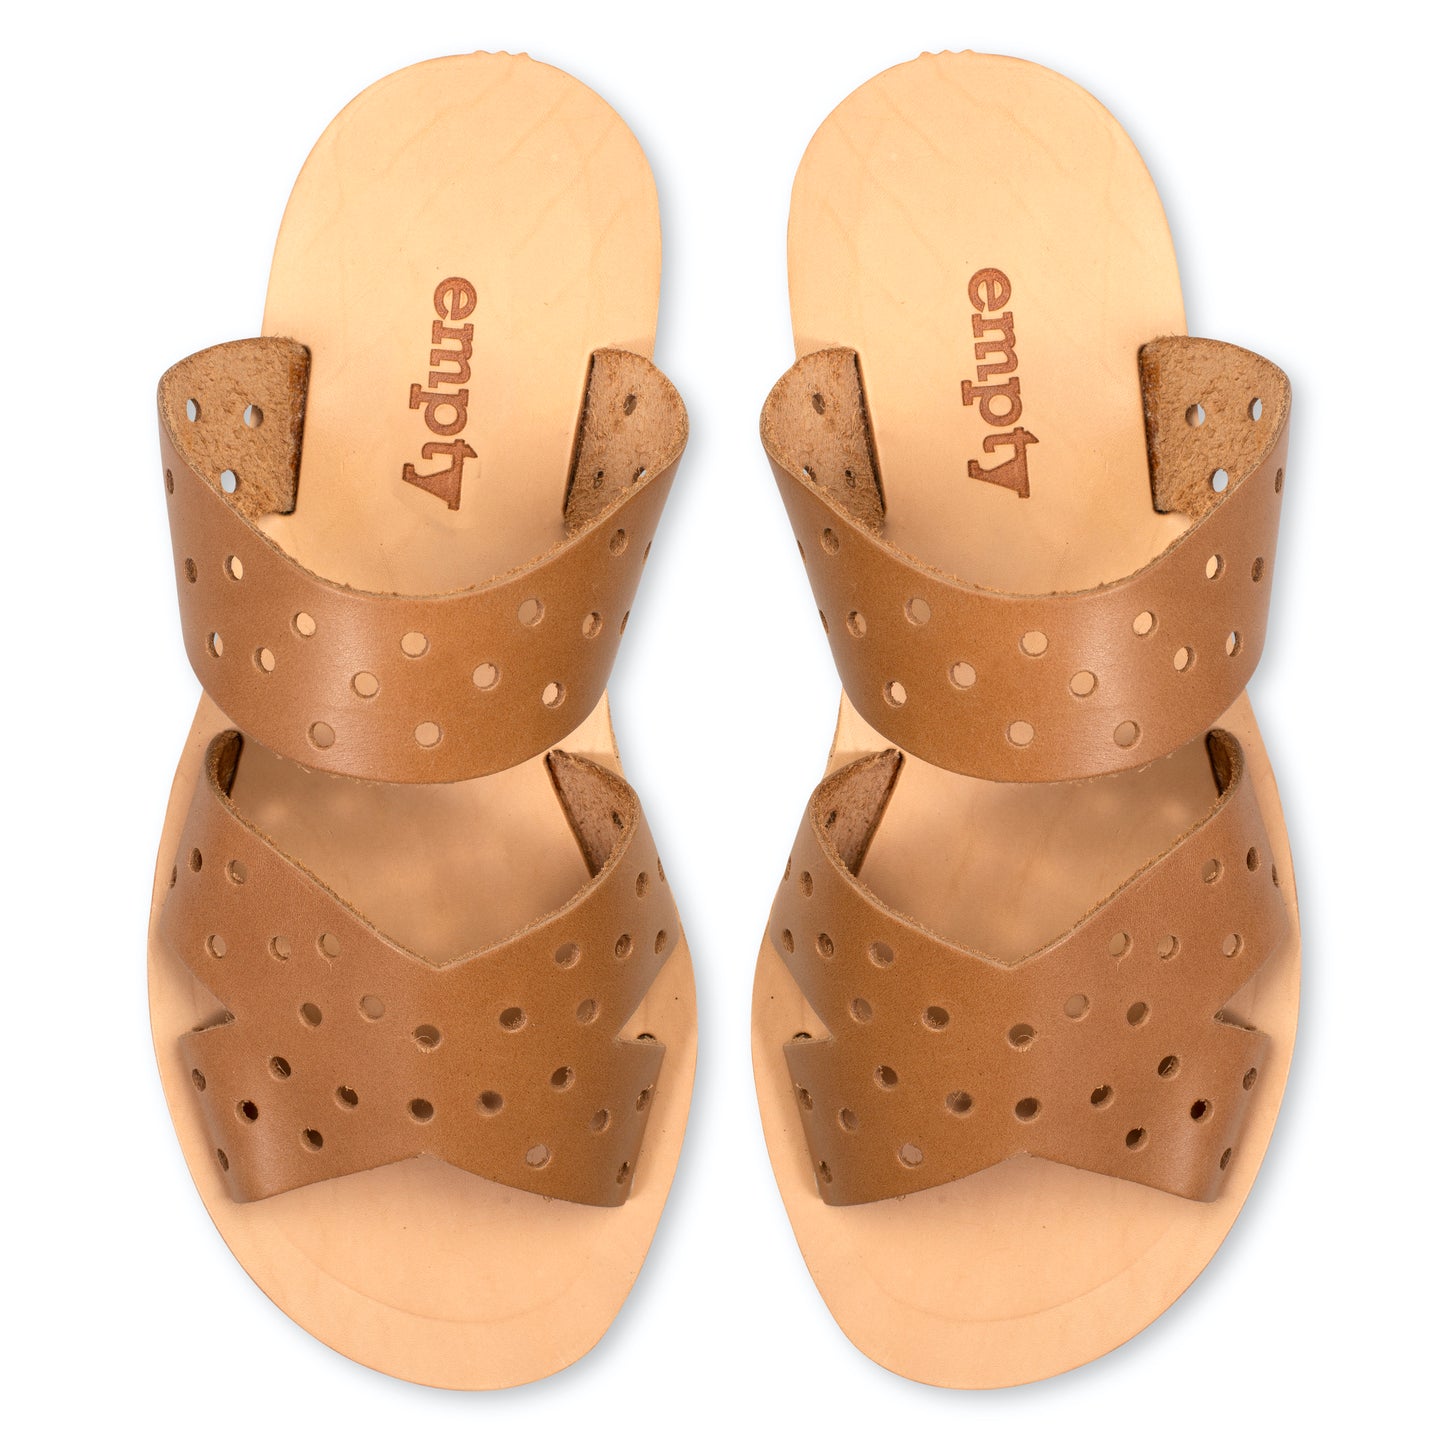 Mabel Leather Sandal - Light Brown Perforated